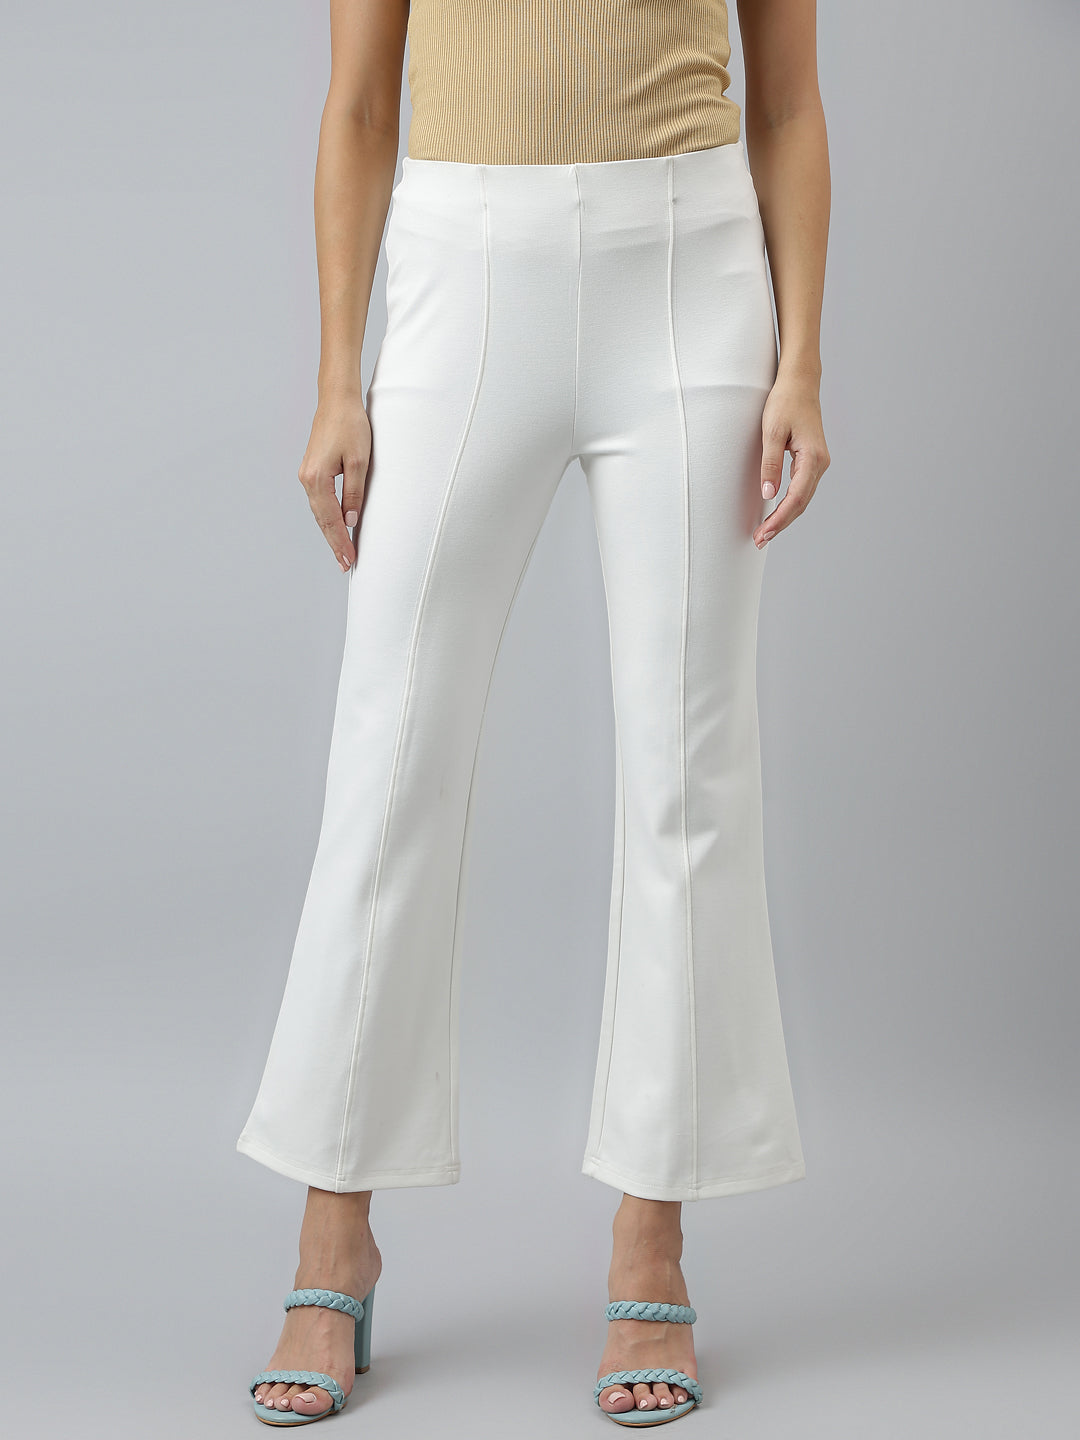 Solid Casual White Pants